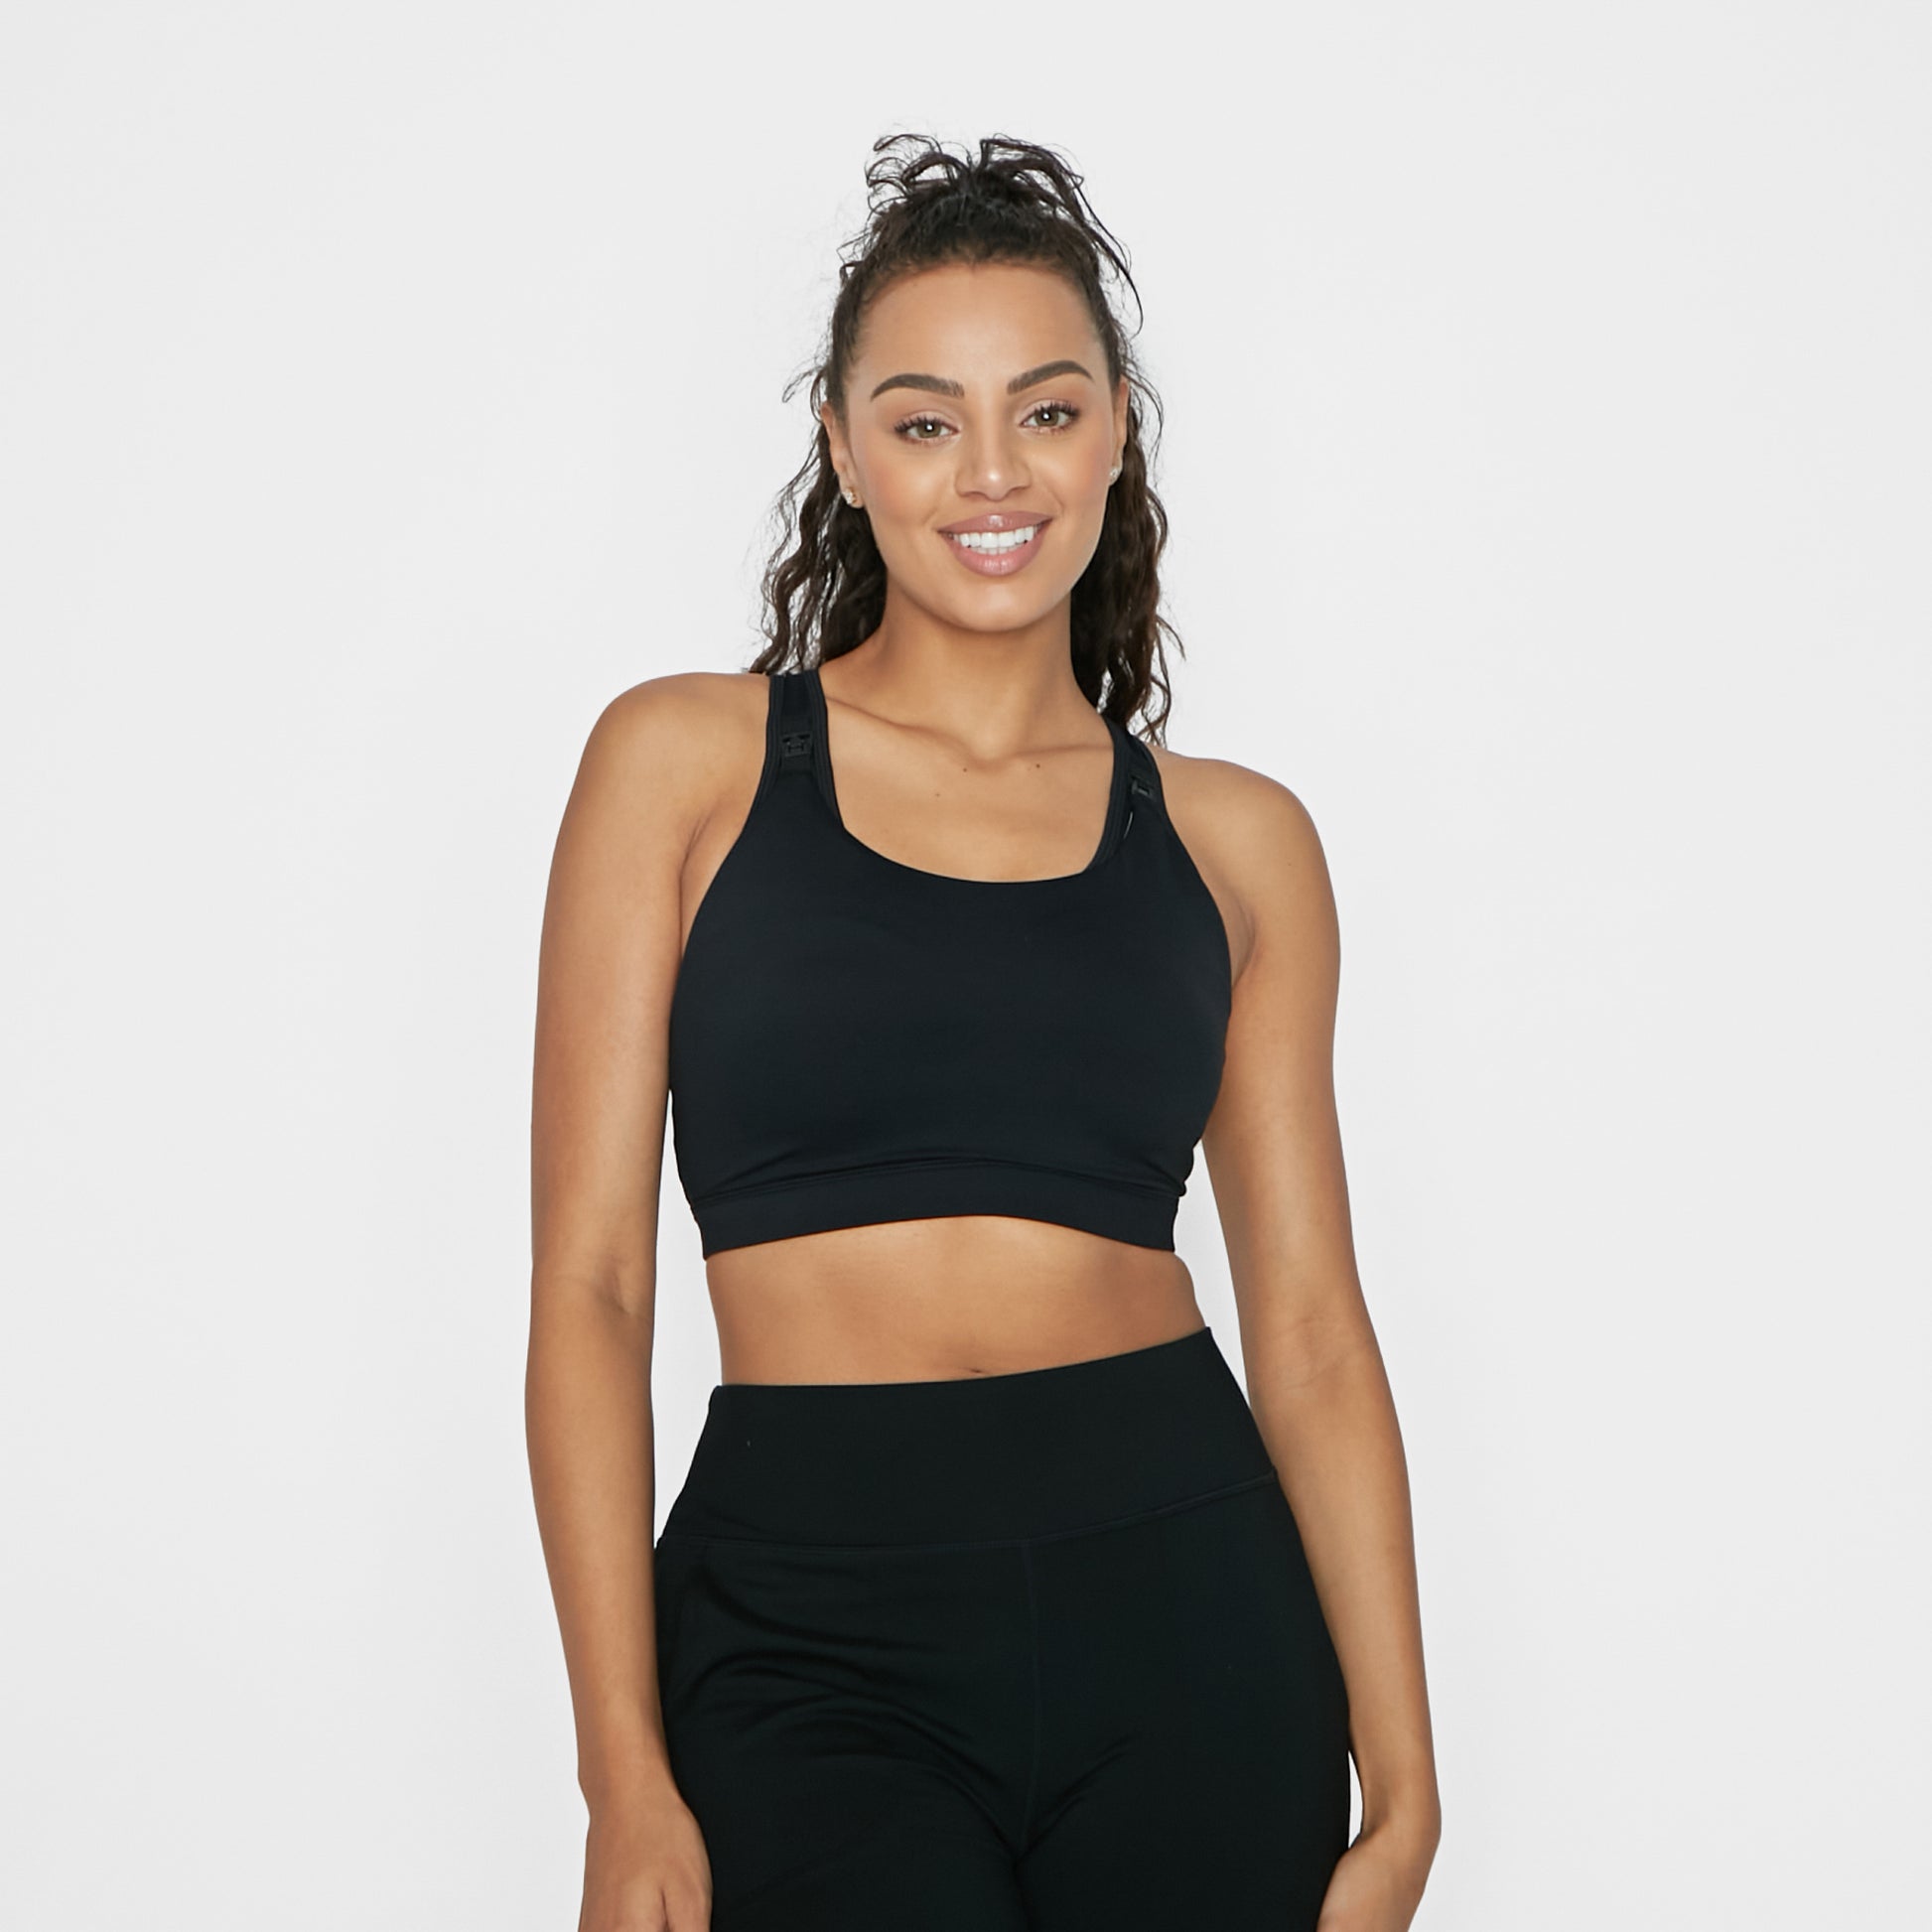 BARA Sportswear - Can never get enough of great Sports Bras